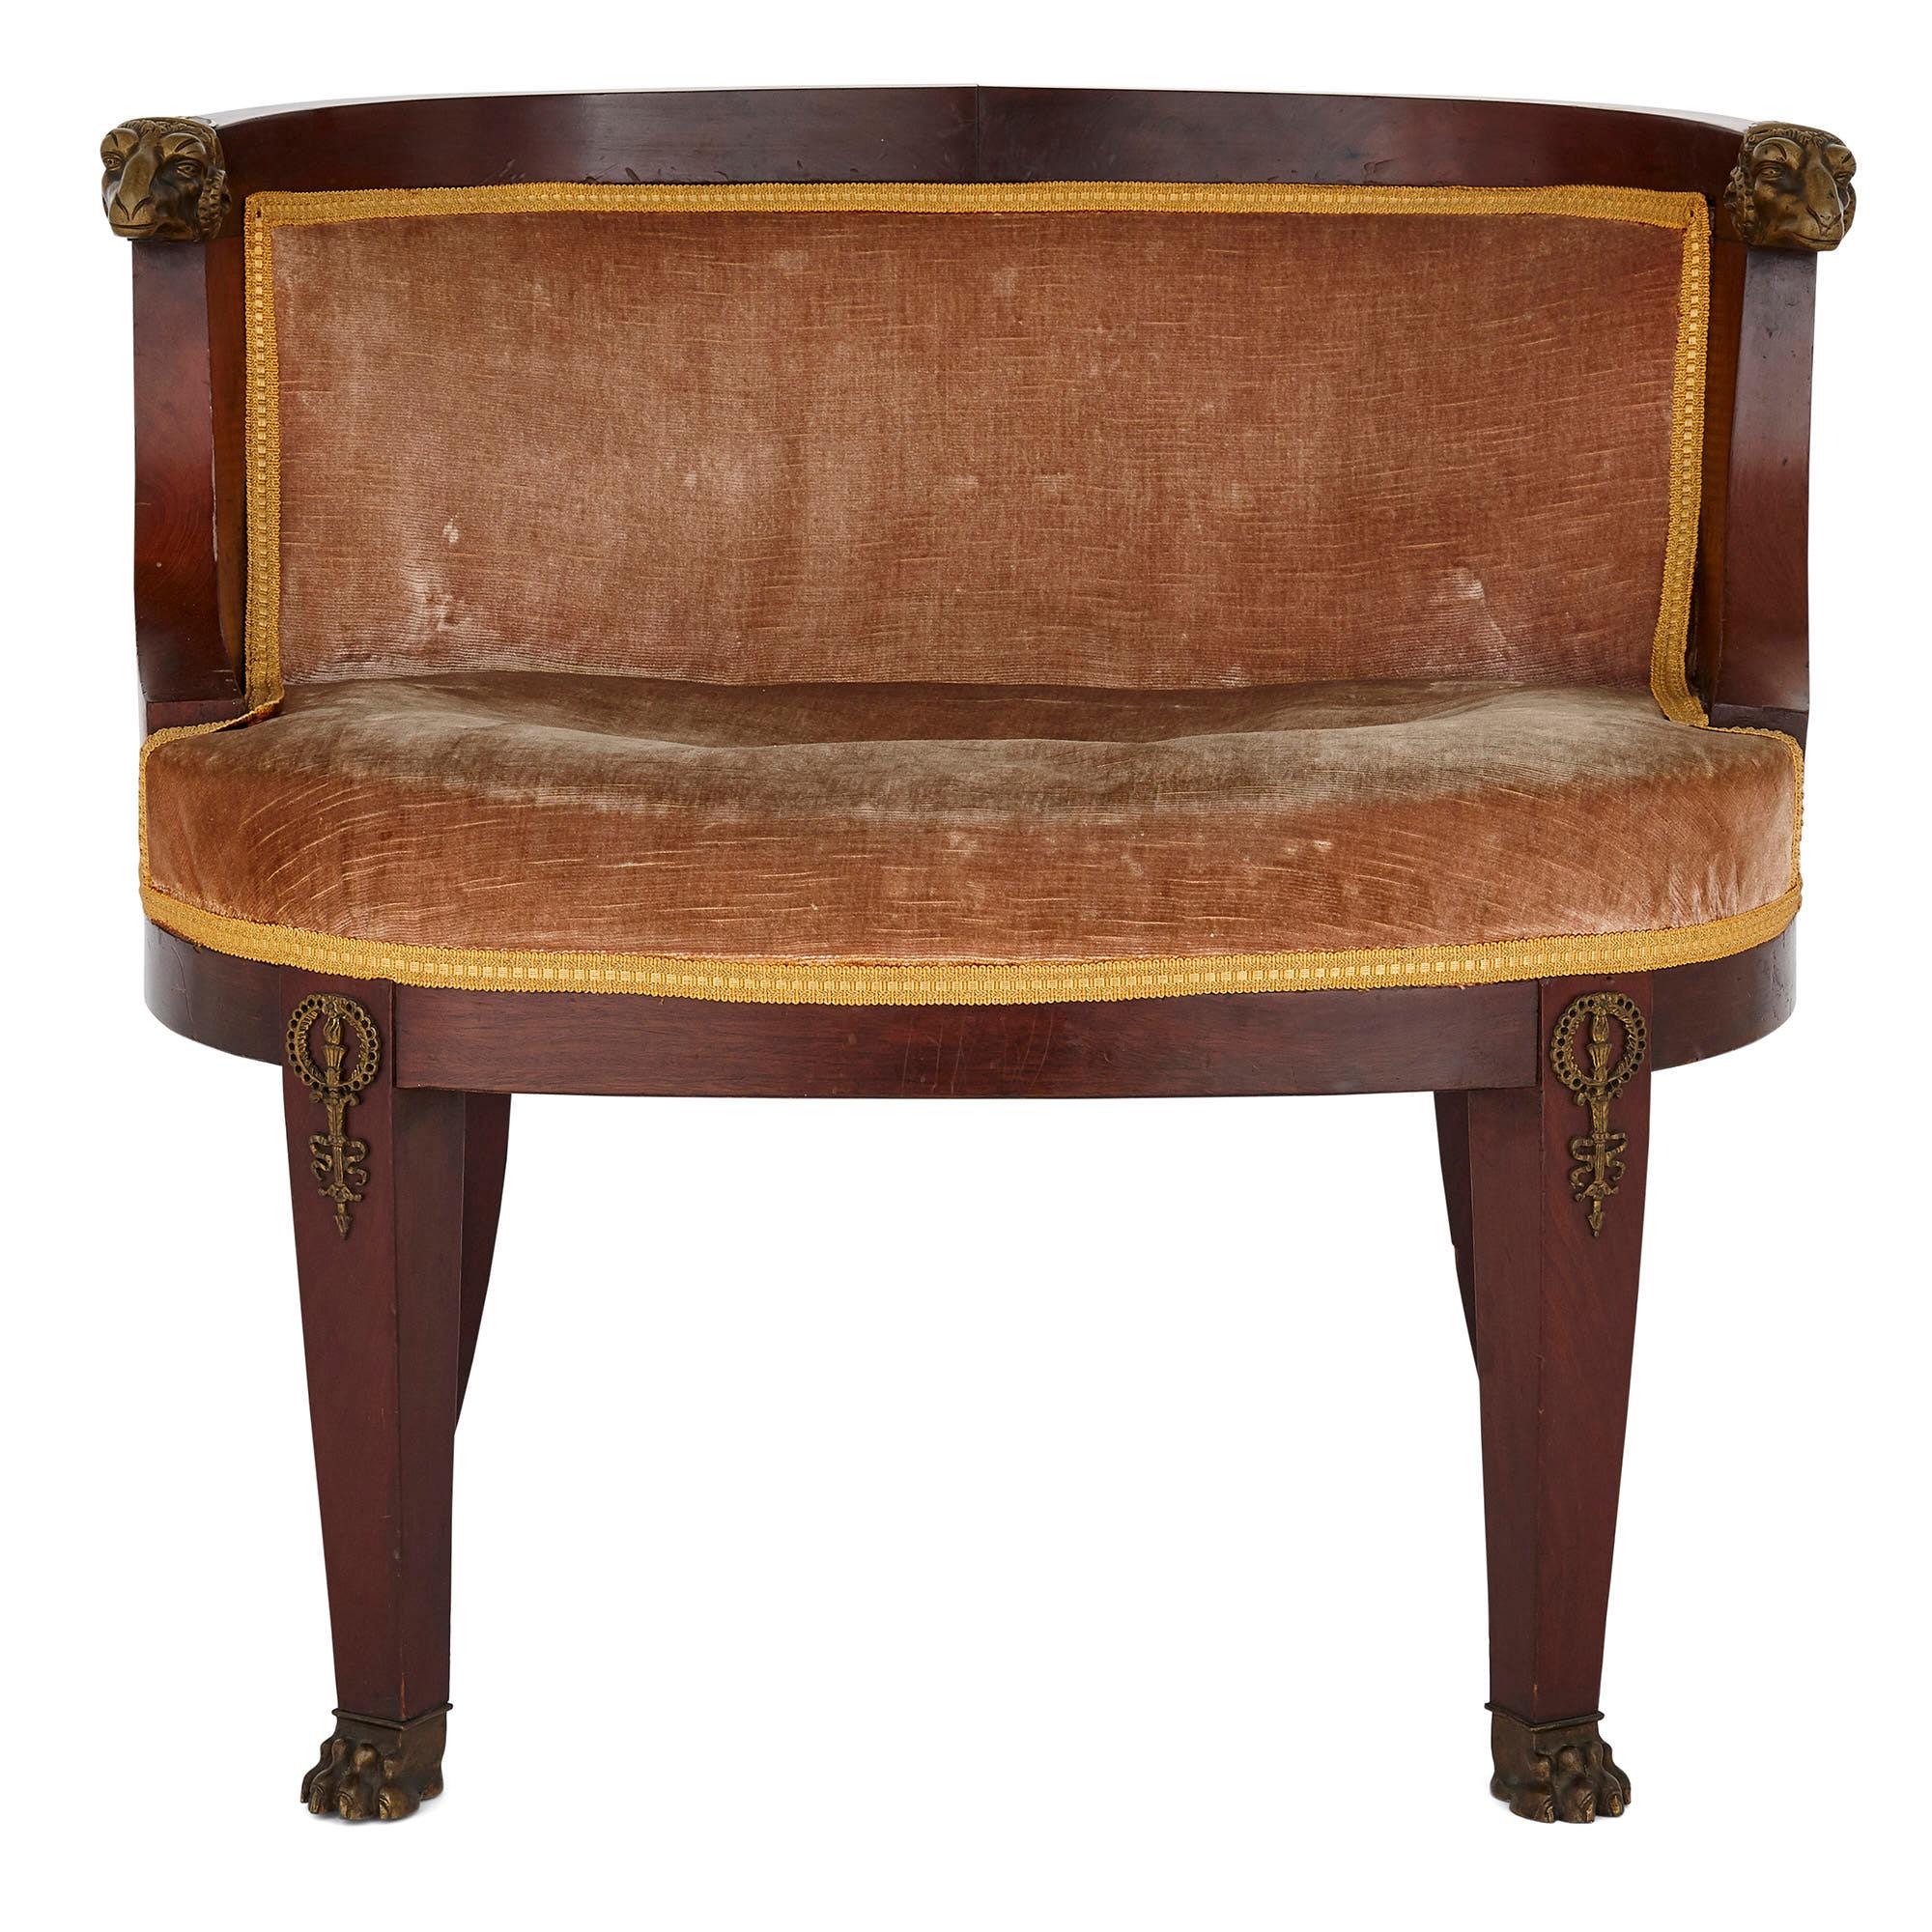 Antique French Empire style armchair
French, early 20th century
Height 65cm, width 74cm, depth 55cm

This elegant armchair is crafted from hardwood, gilt bronze, and upholstery in the Empire style. The chair features an oblong upholstered seat